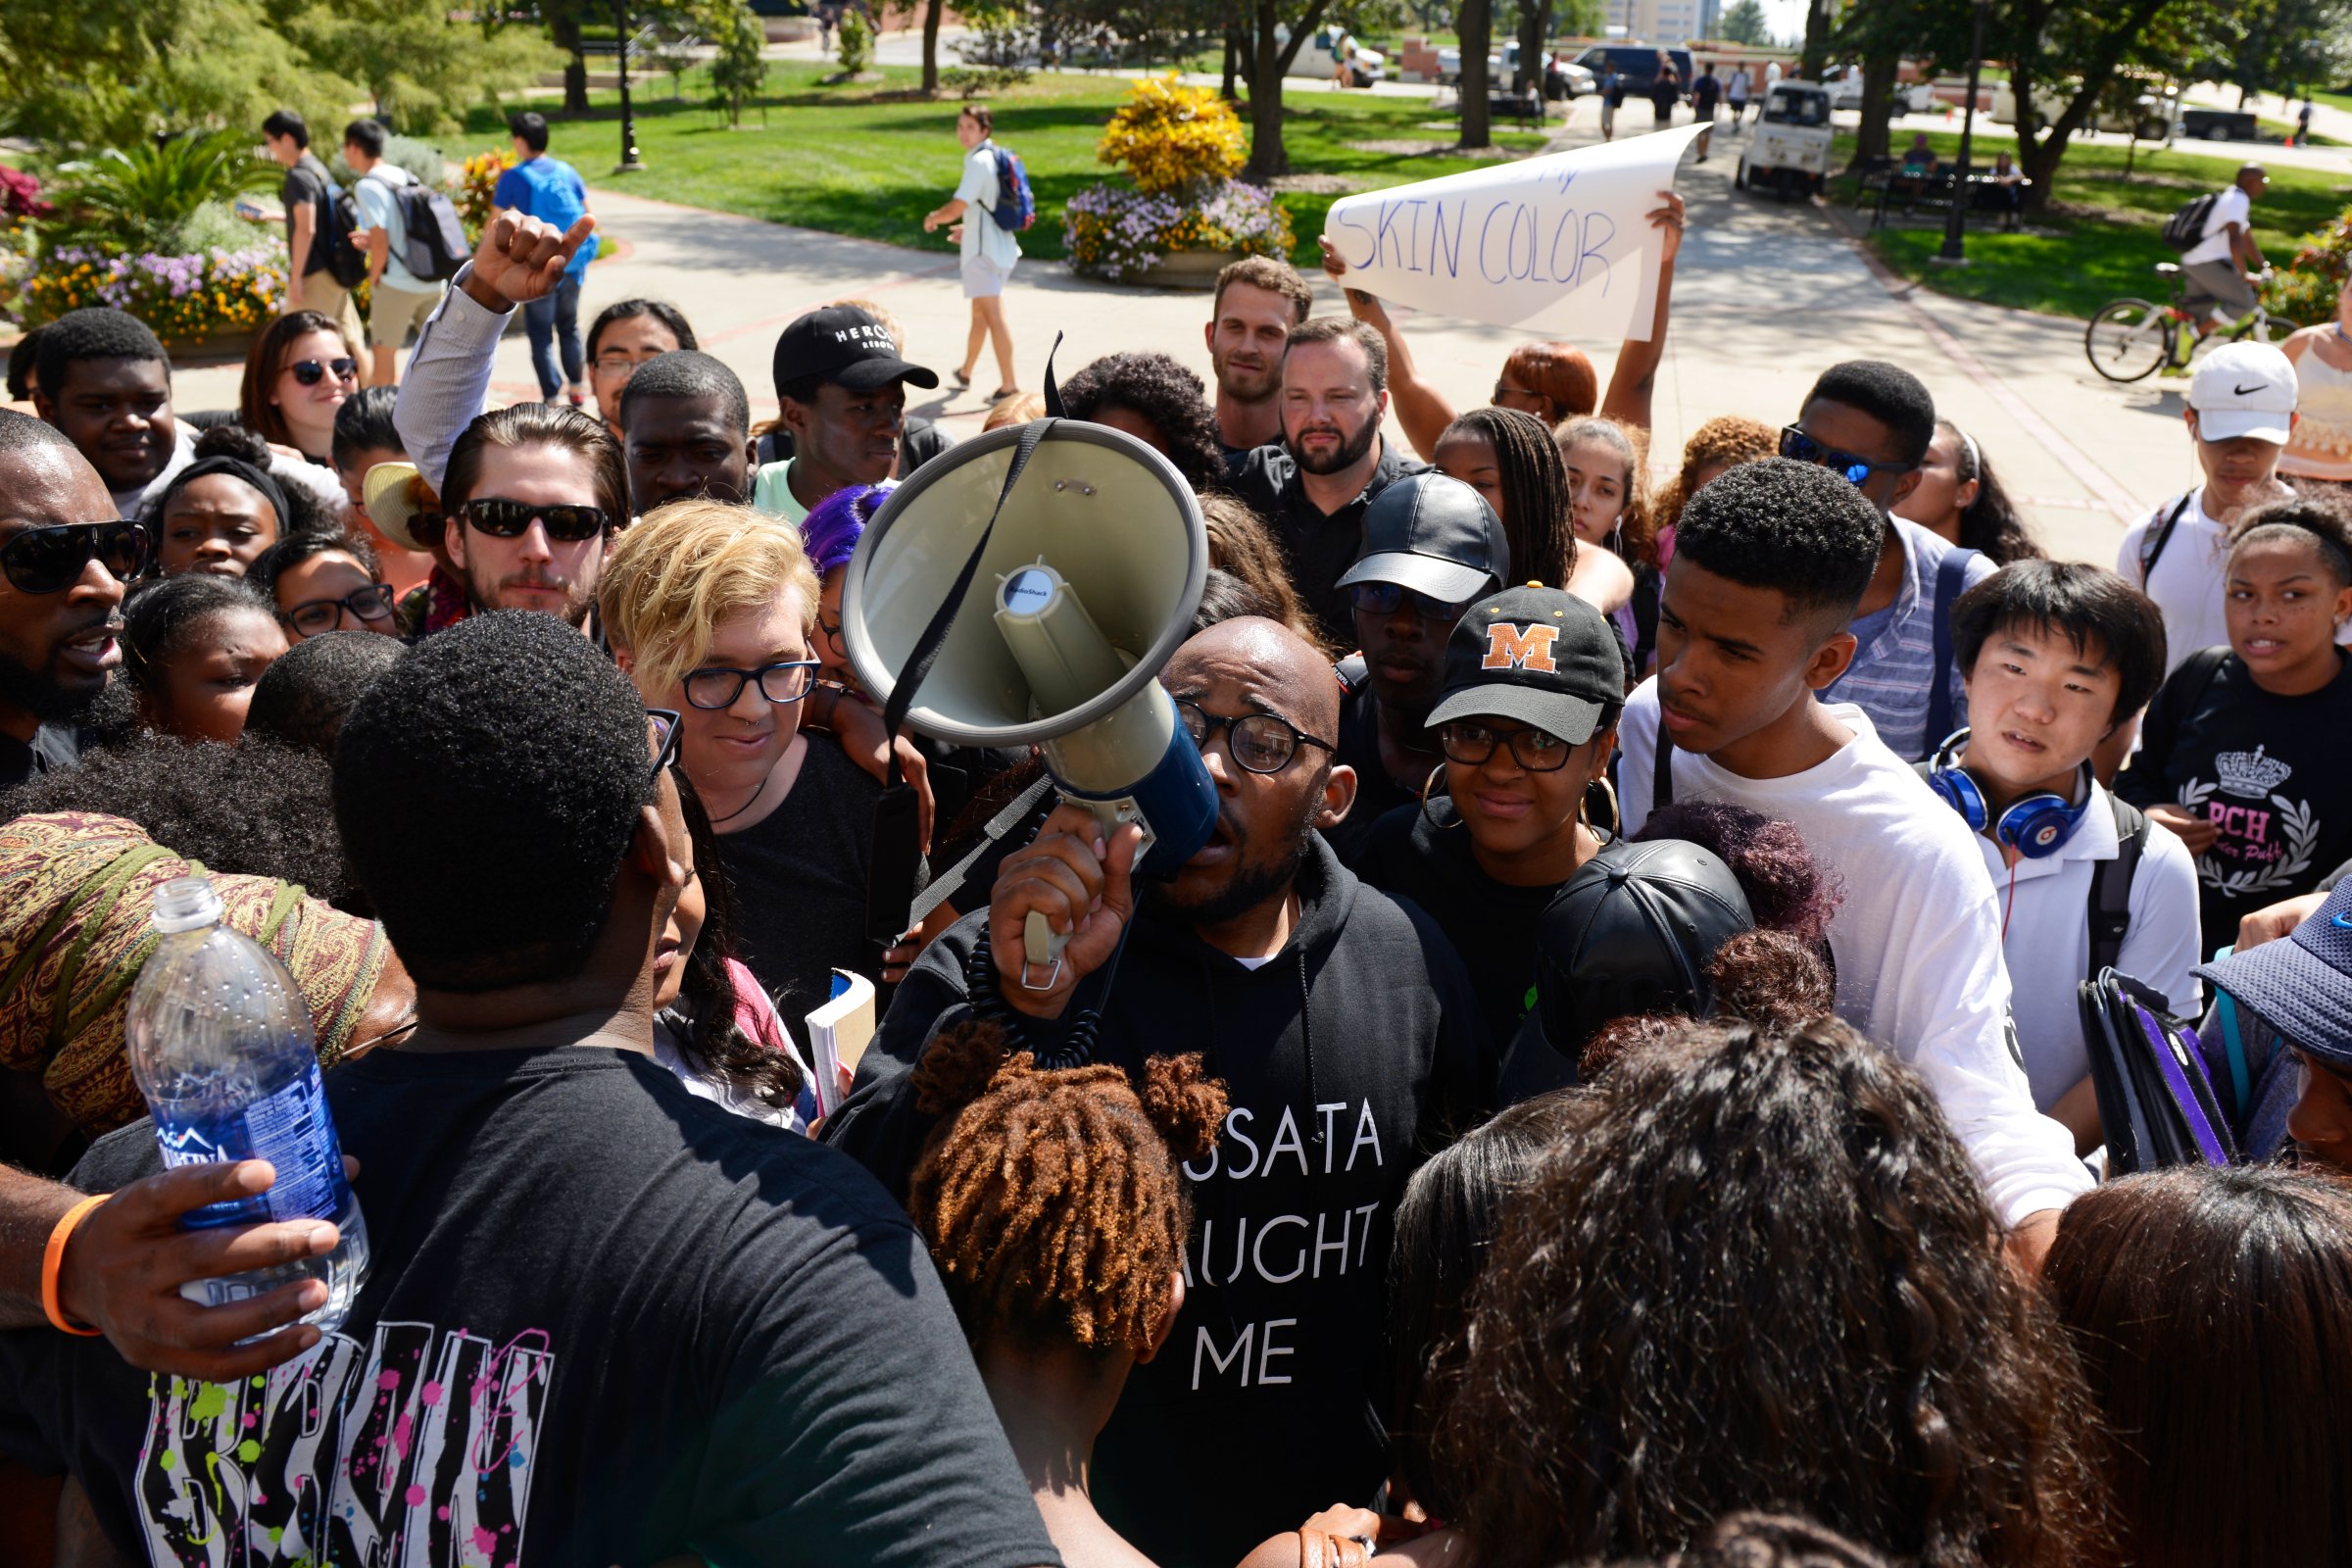 Students gather around graduate student Jonathan Butler for a group hug after marching into Jesse Hall on the University of Missouri campus in Columbia, Mo. on Sept. 24, 2015.